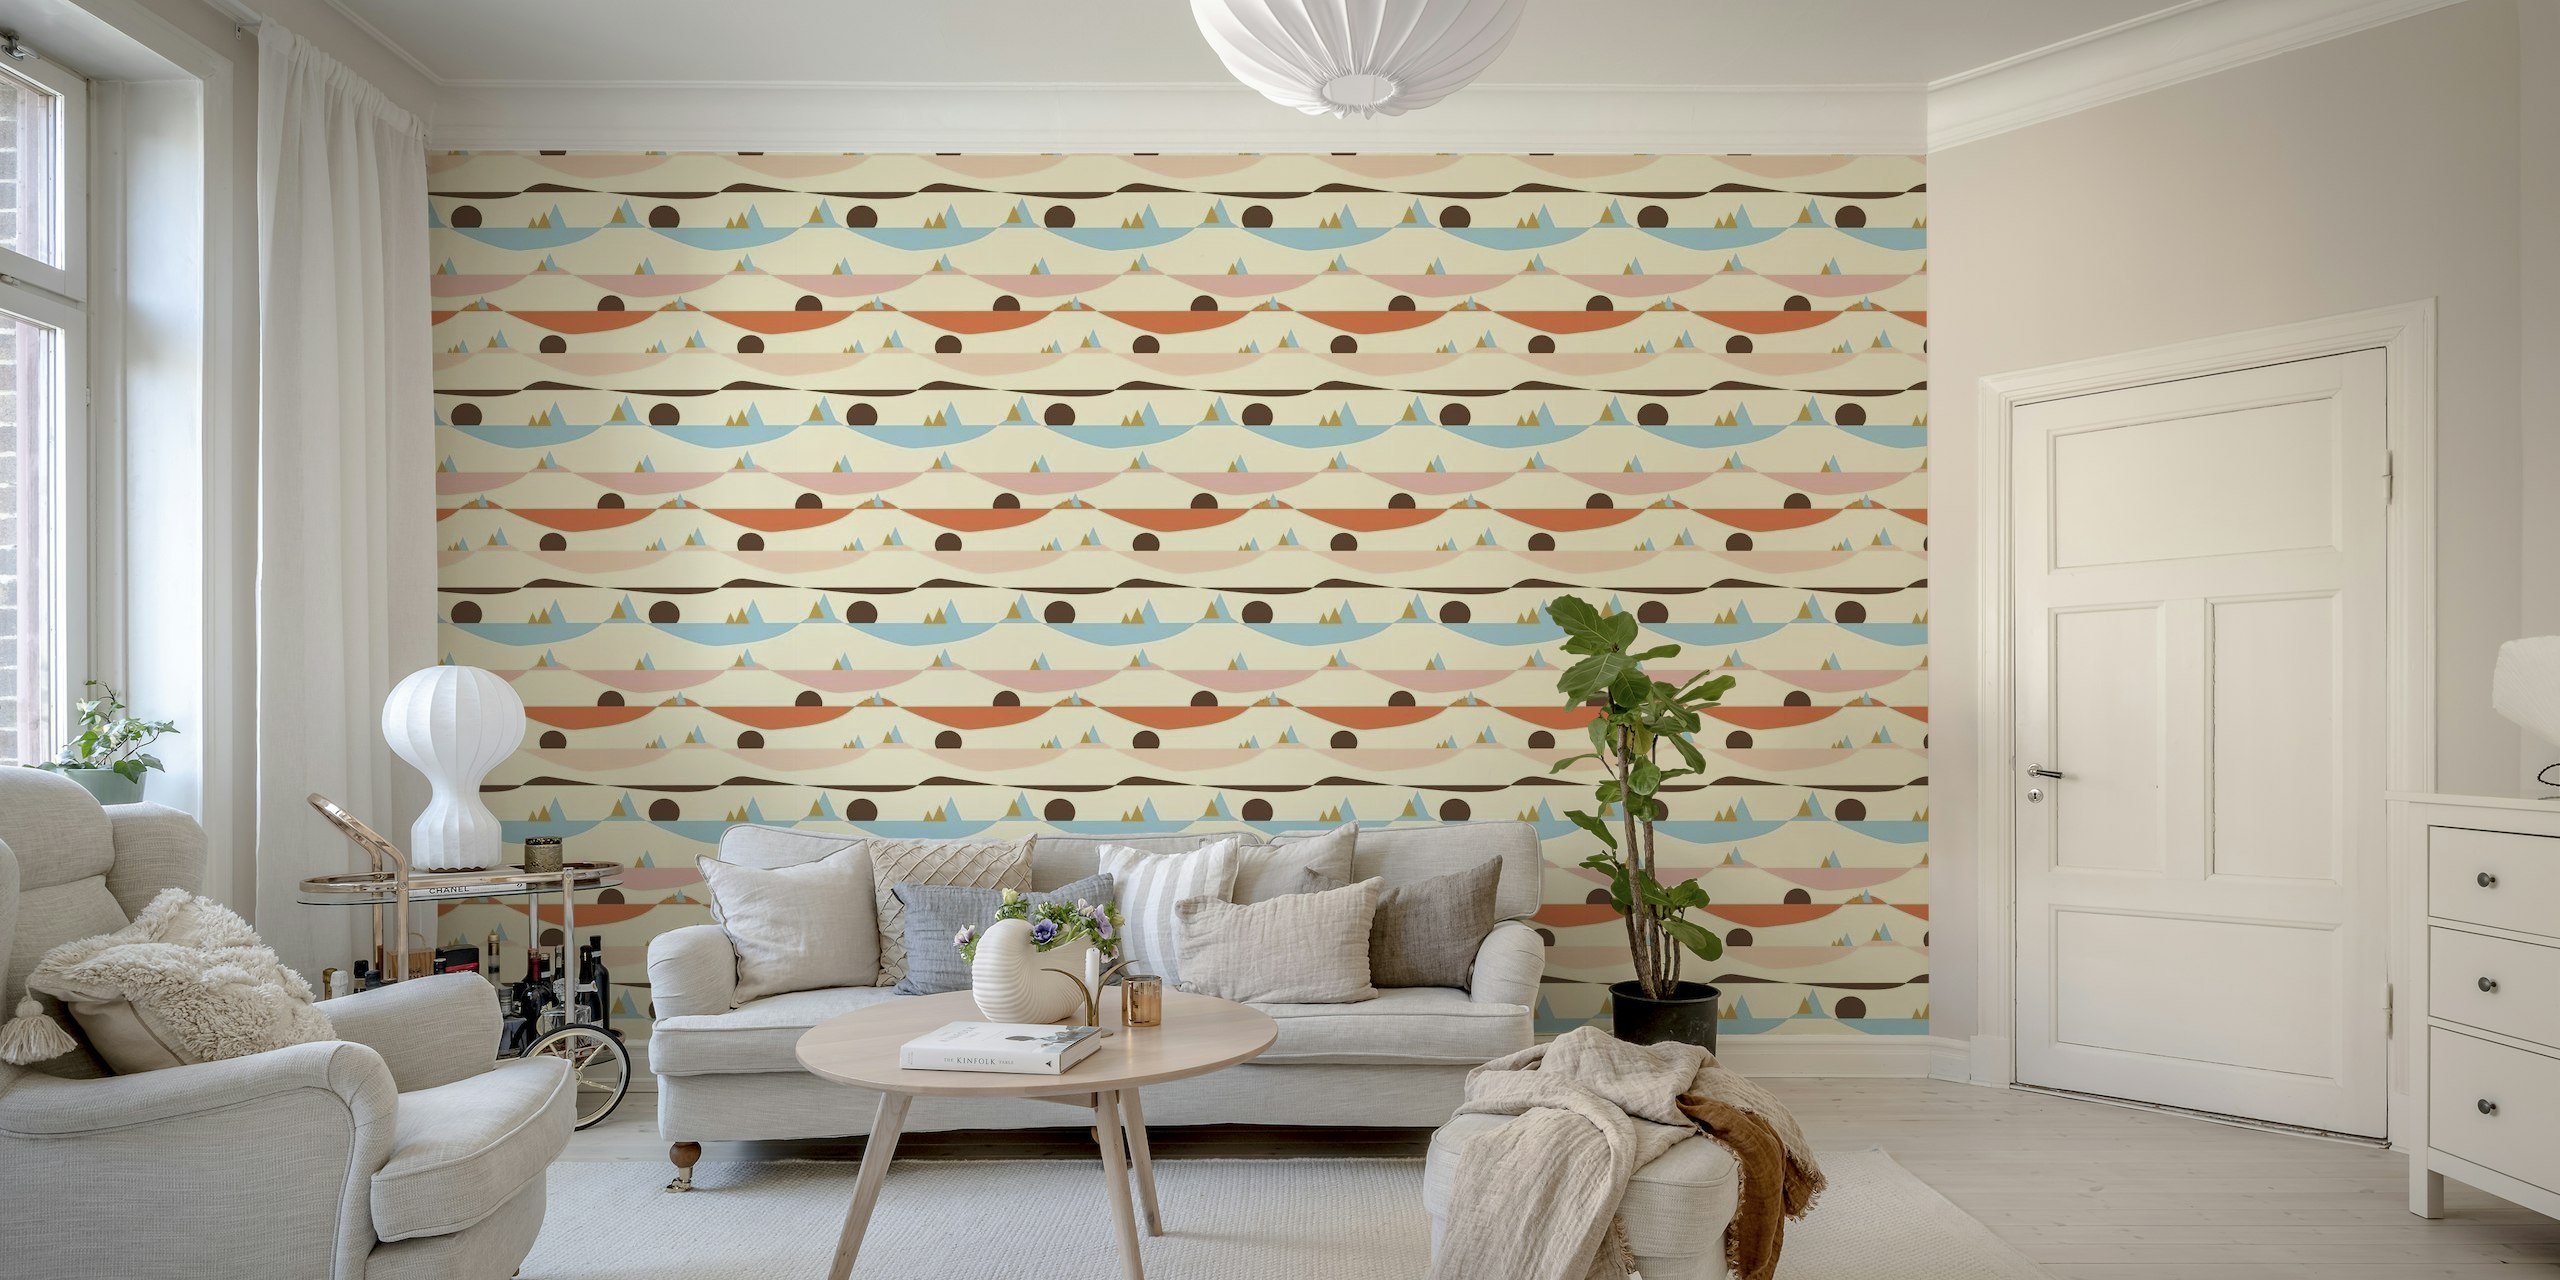 Abstract Apricity Landscape Beige wall mural with geometric mountain patterns